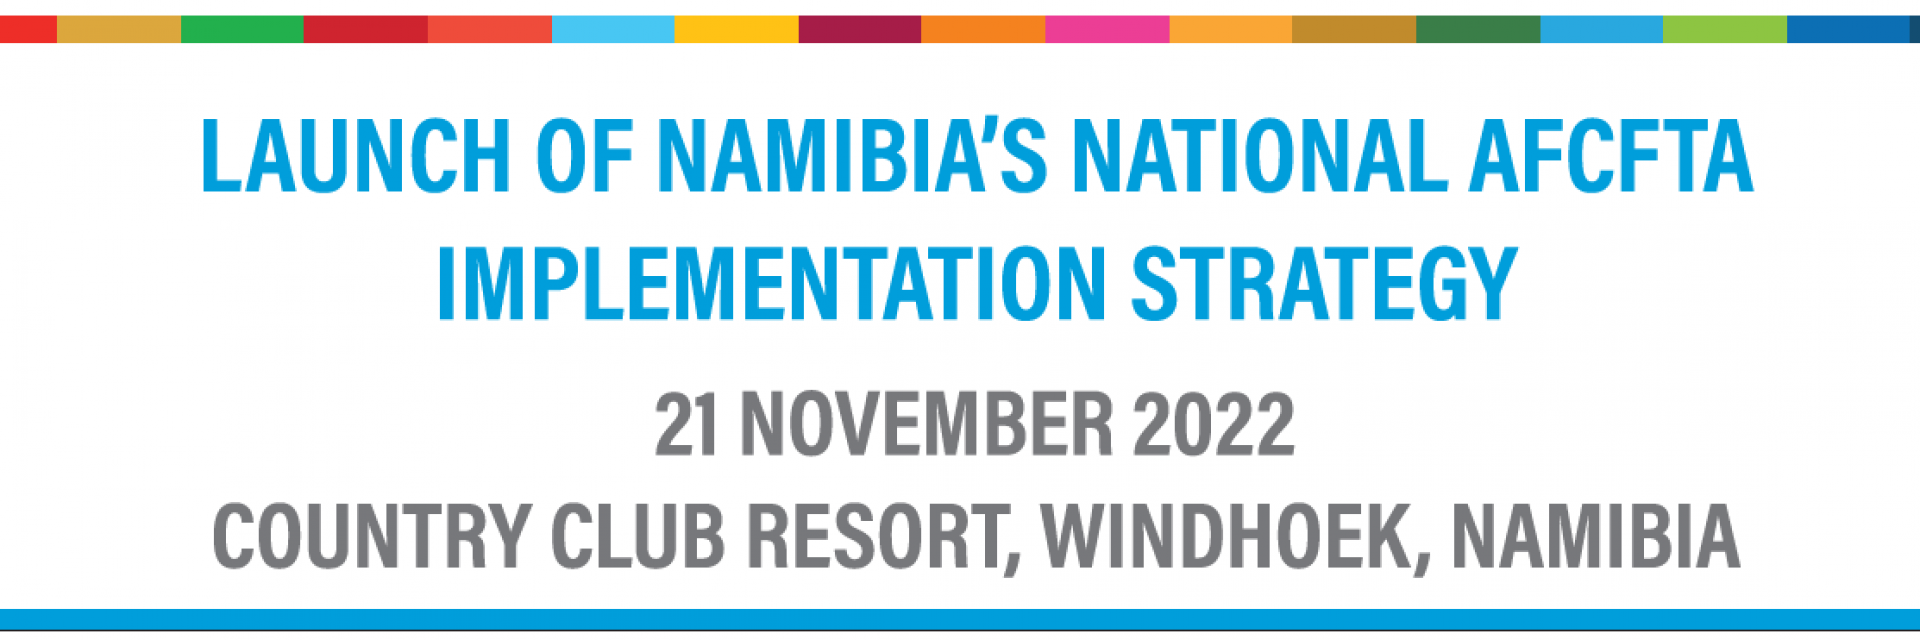 Launching Namibia’s National Strategy and Implementation Plan for African Continental Free Trade Area (AfCFTA)